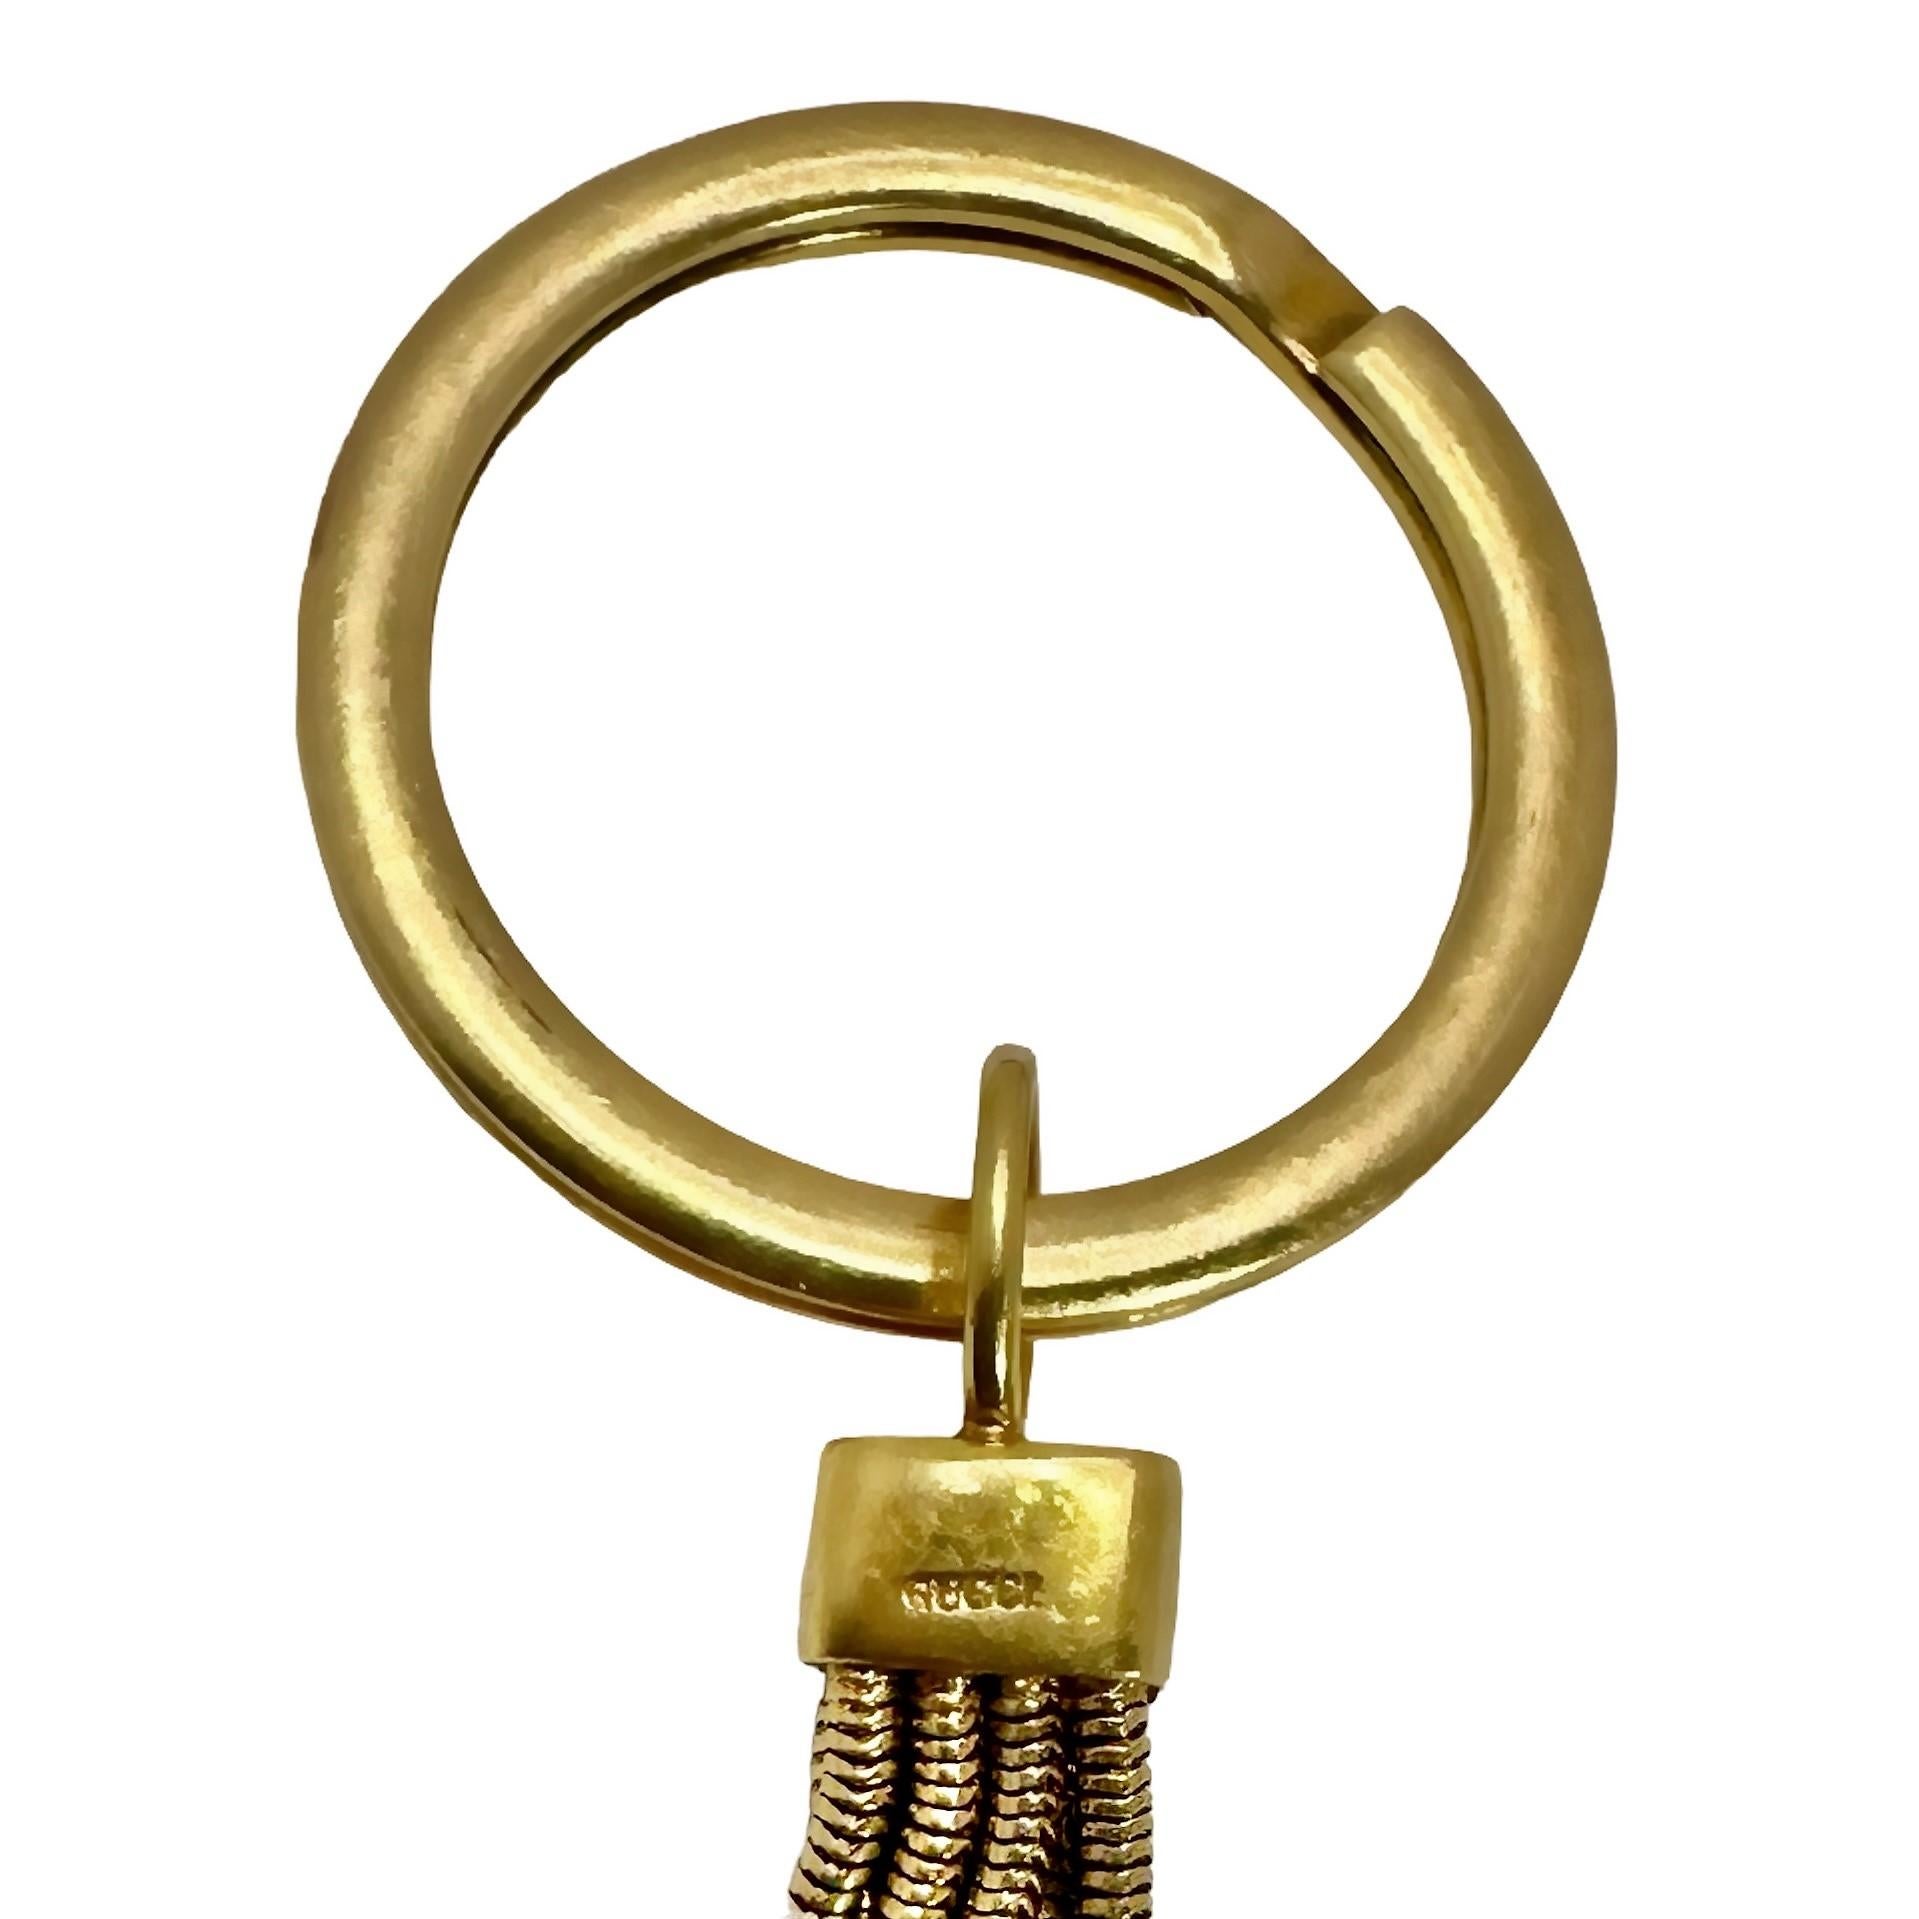 This imaginative Mid-20th Century Gucci key chain consists of a large gold key ring from which is suspended a length of round Cobra Link chain holding a large natural rock crystal, frosted, reptilian pattern heart. The heart measures almost 1 3/8